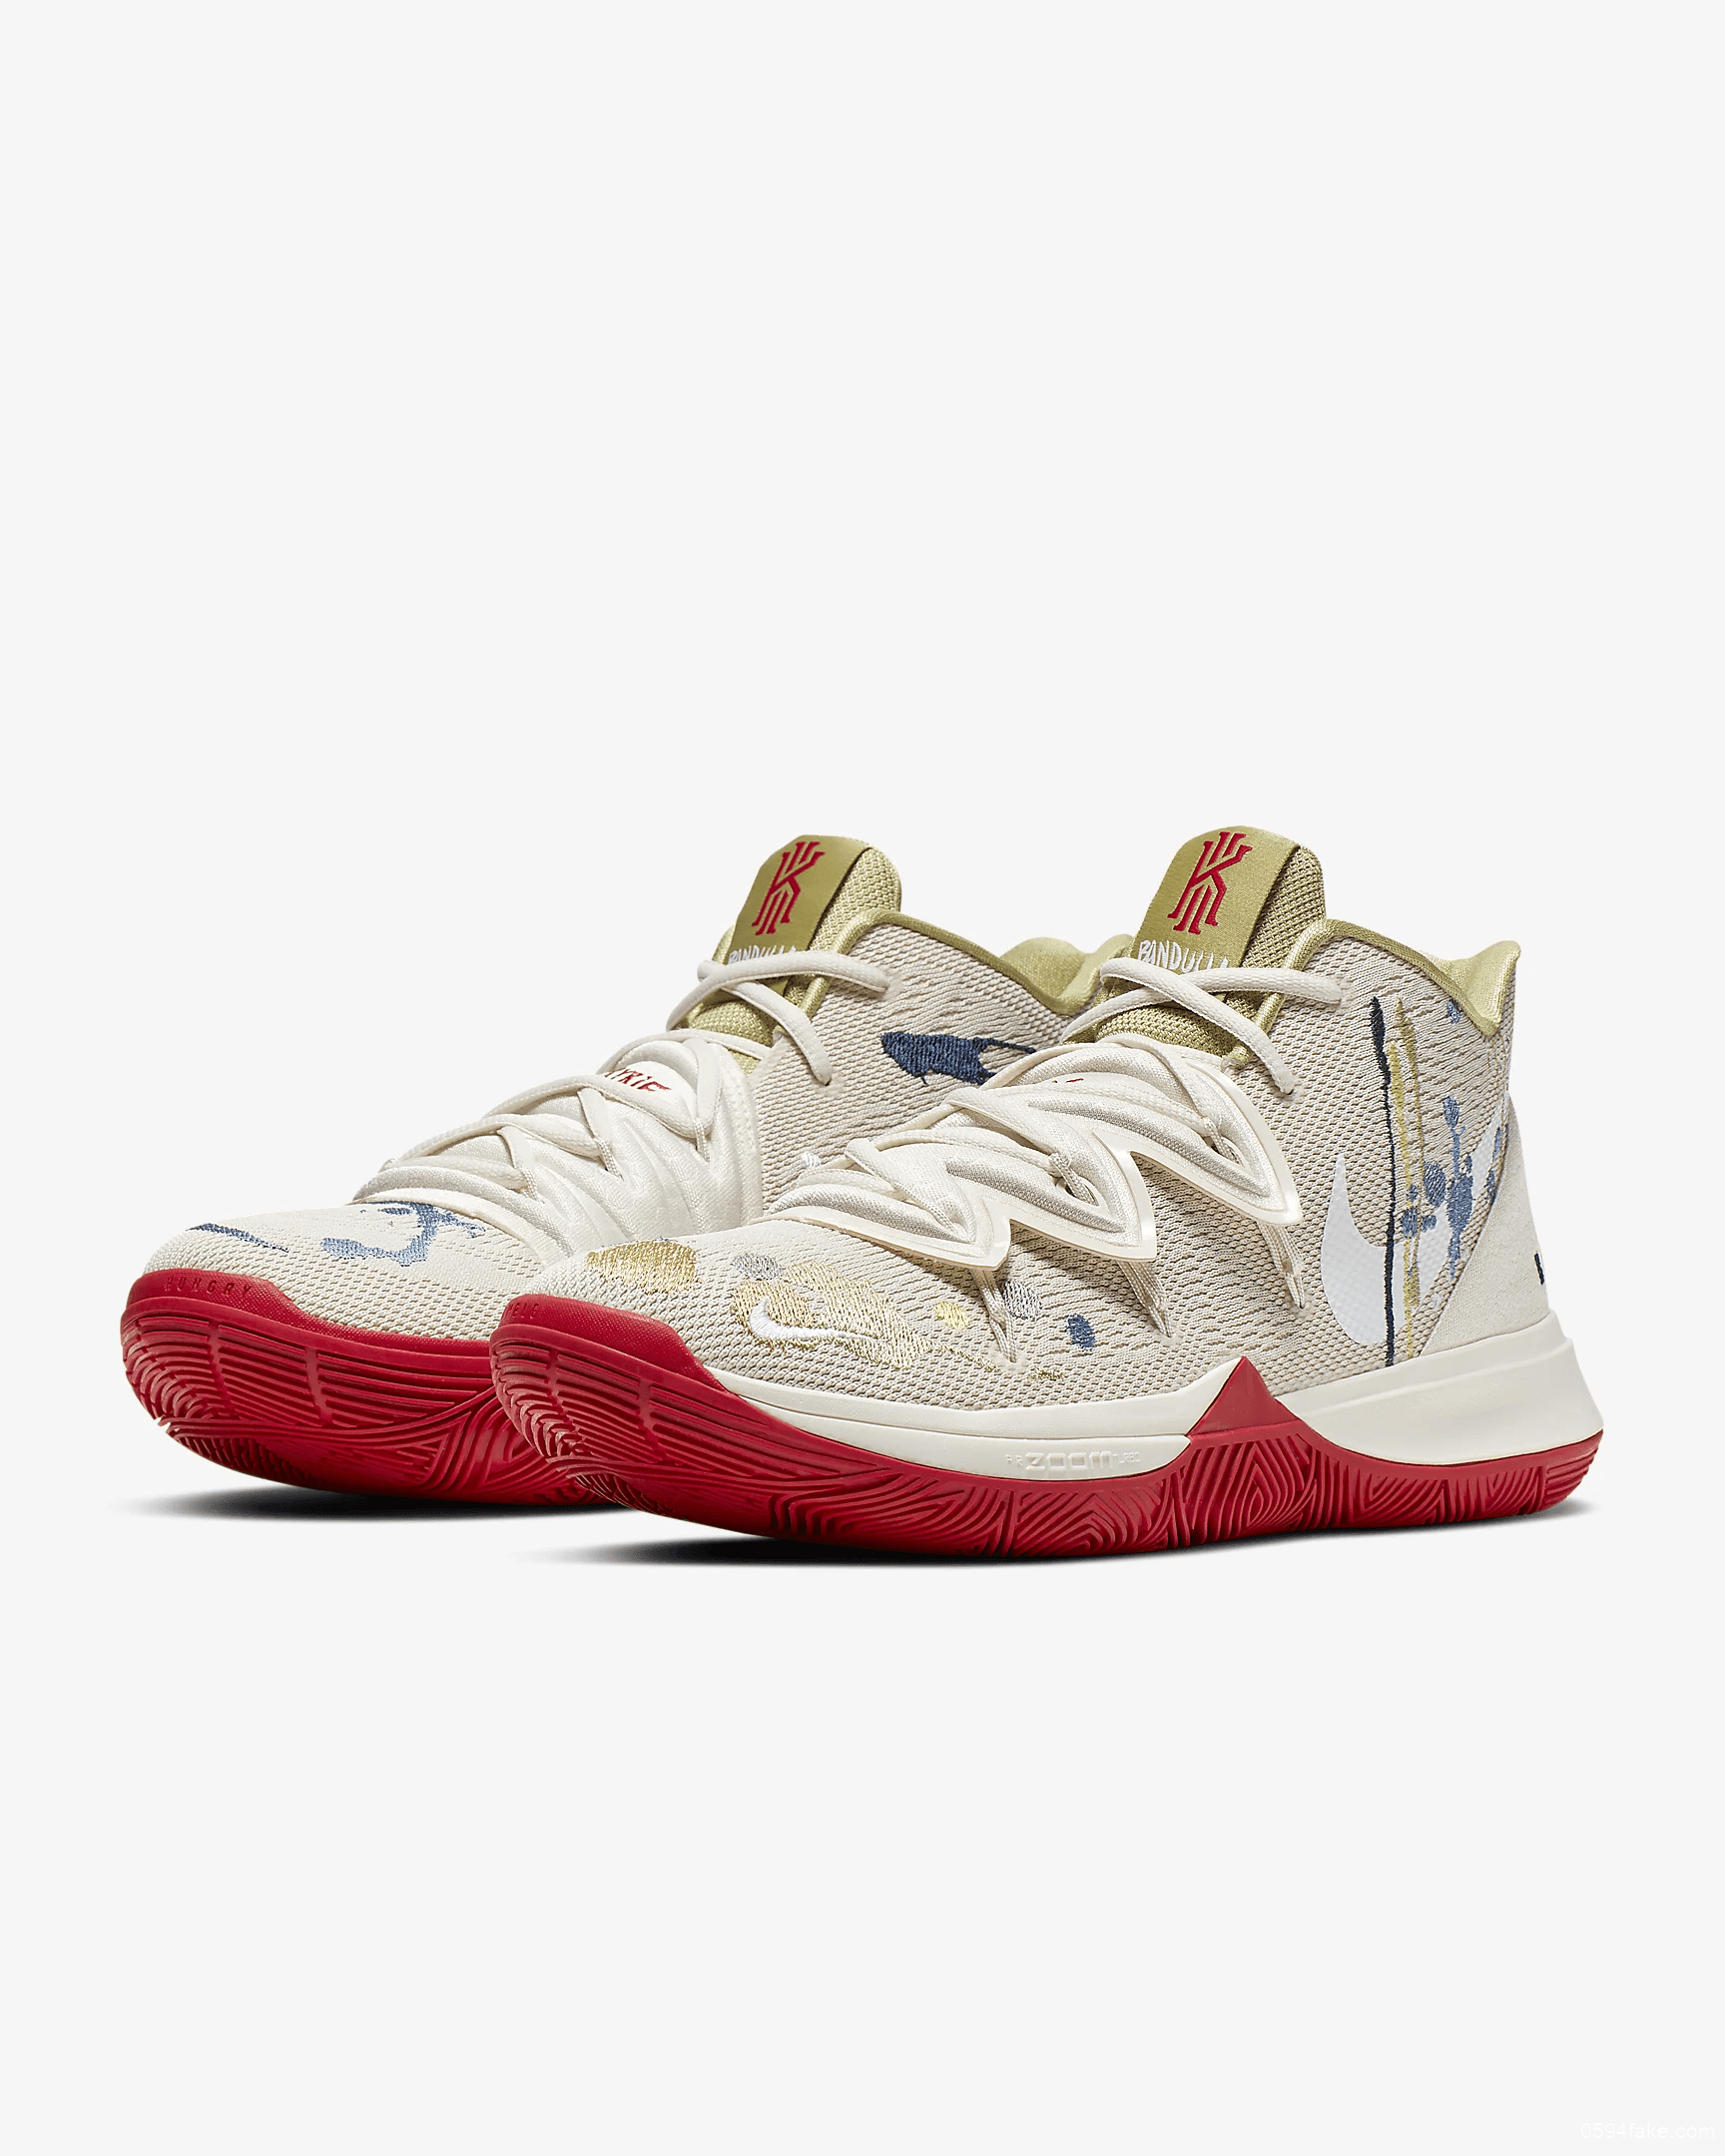 Nike Bandulu x Kyrie 5 EP 'Embroidered Splatters' CK5837-100: Exclusive Collaboration for Nike Basketball Fans